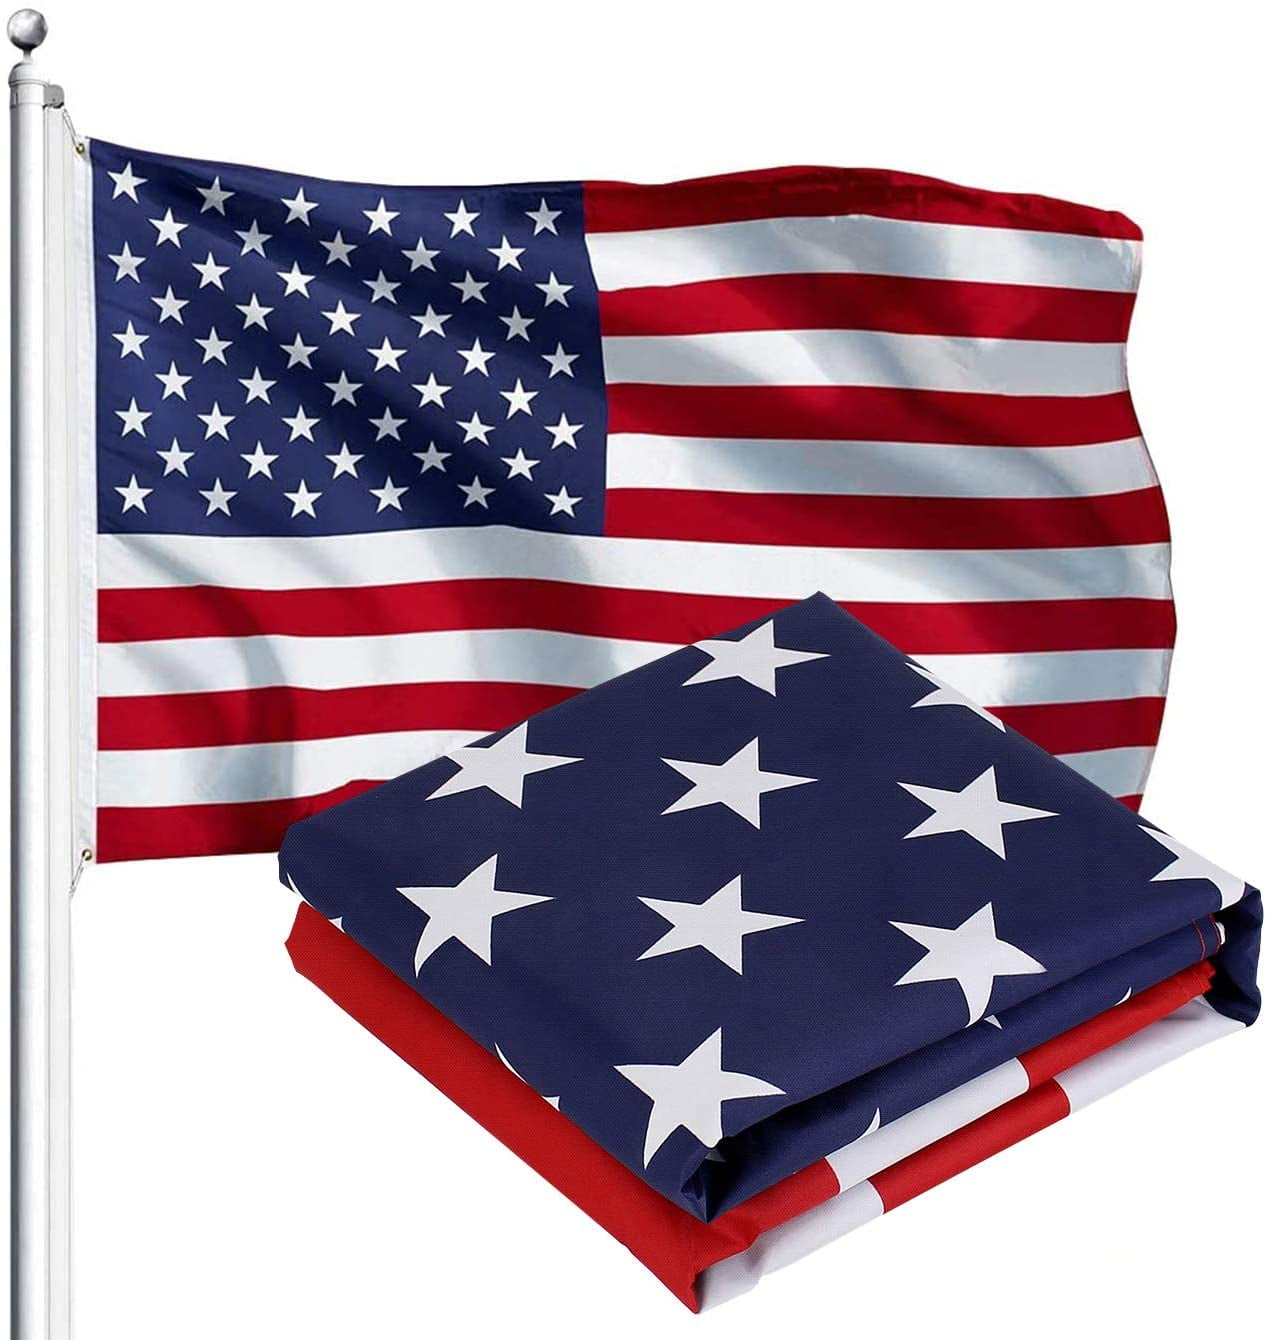 3x5 Ft American Flag w/ Grommets ~2 Pack~ USA United States of America ~US Flags 